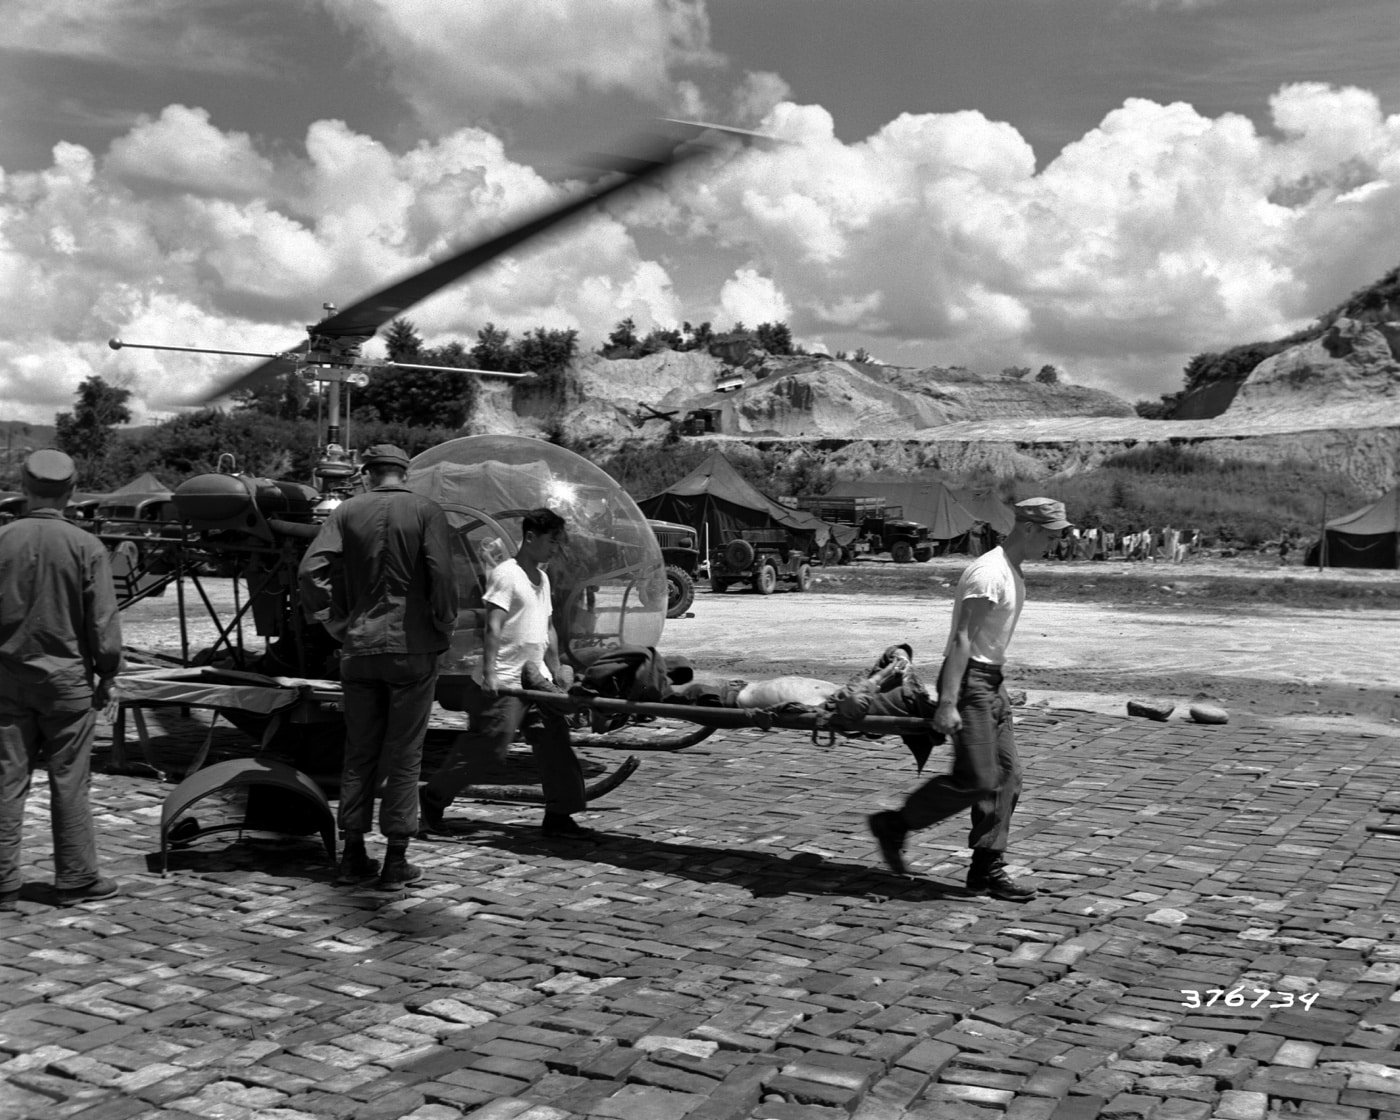 Wounded soldier taken from H-13 helicopter Korea 1951